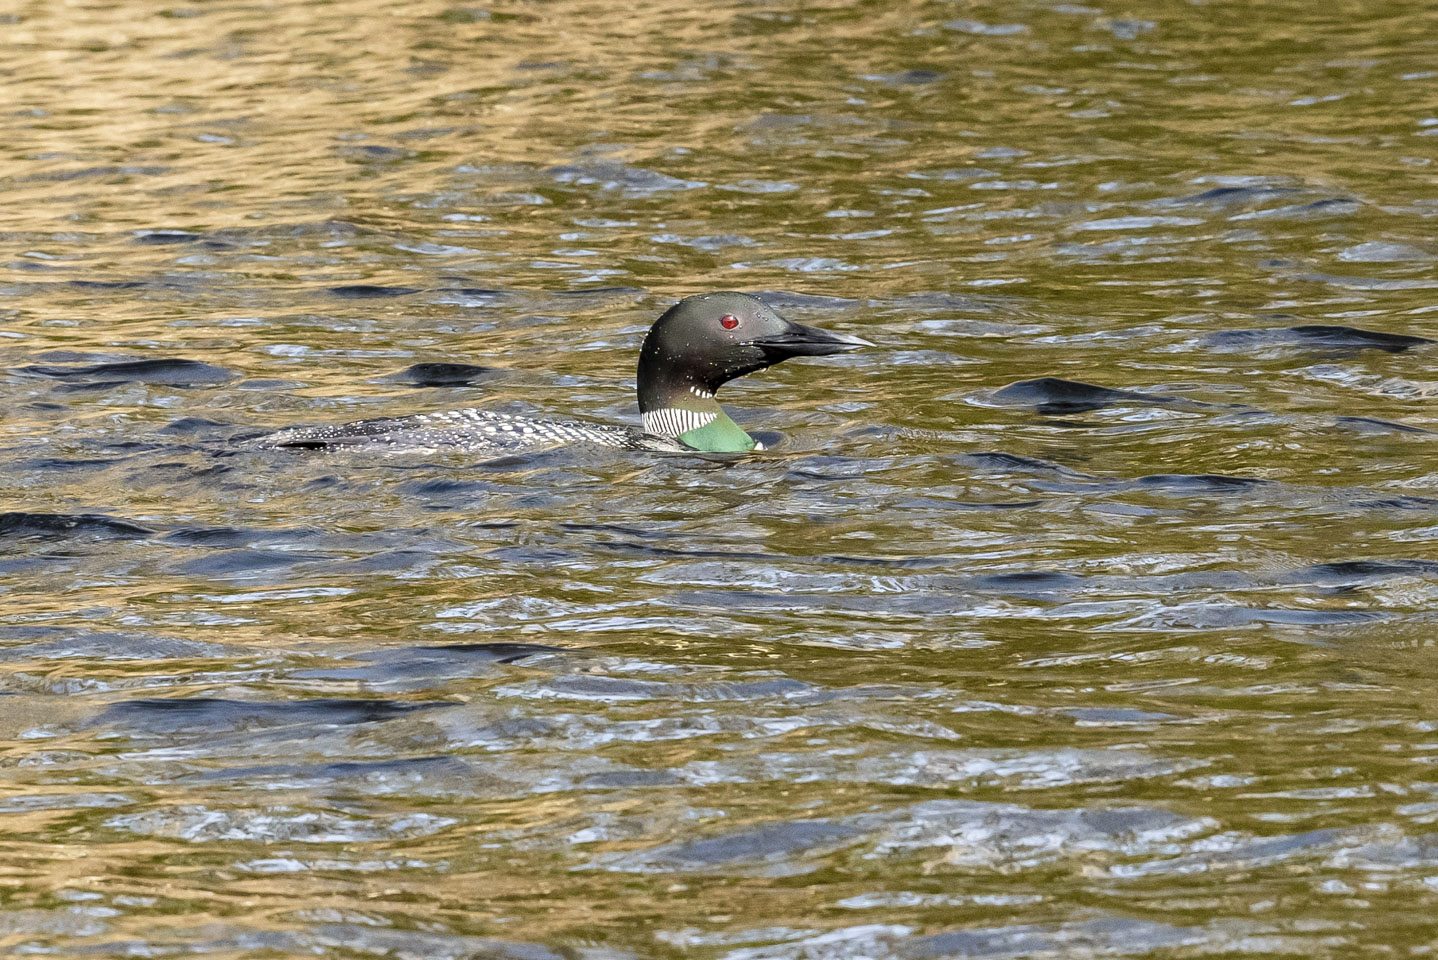 Loon in the water, Murray Preserve